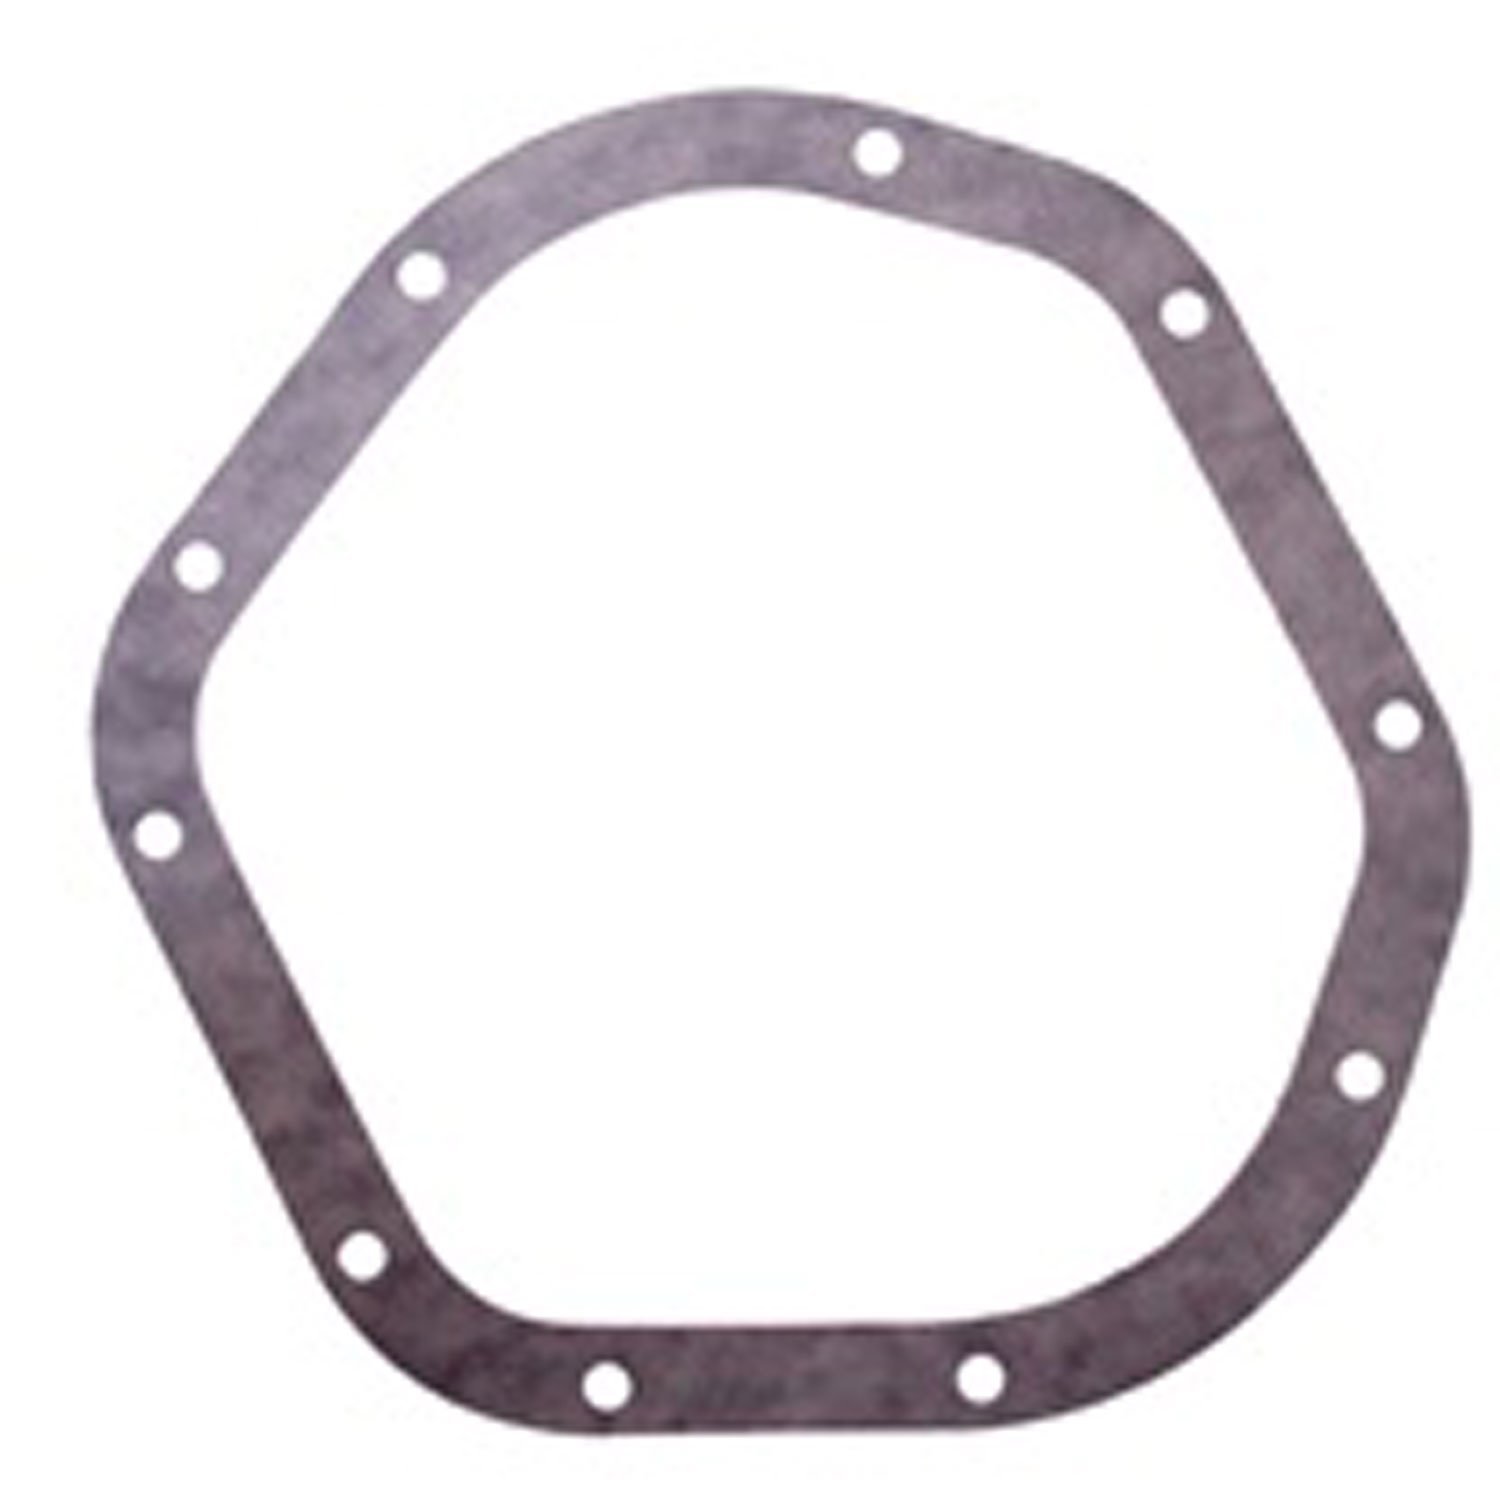 Stock replacement differential cover gasket from Spicer, Fits 01-06 Jeep Wrangler TJ with Dana 44 axle.